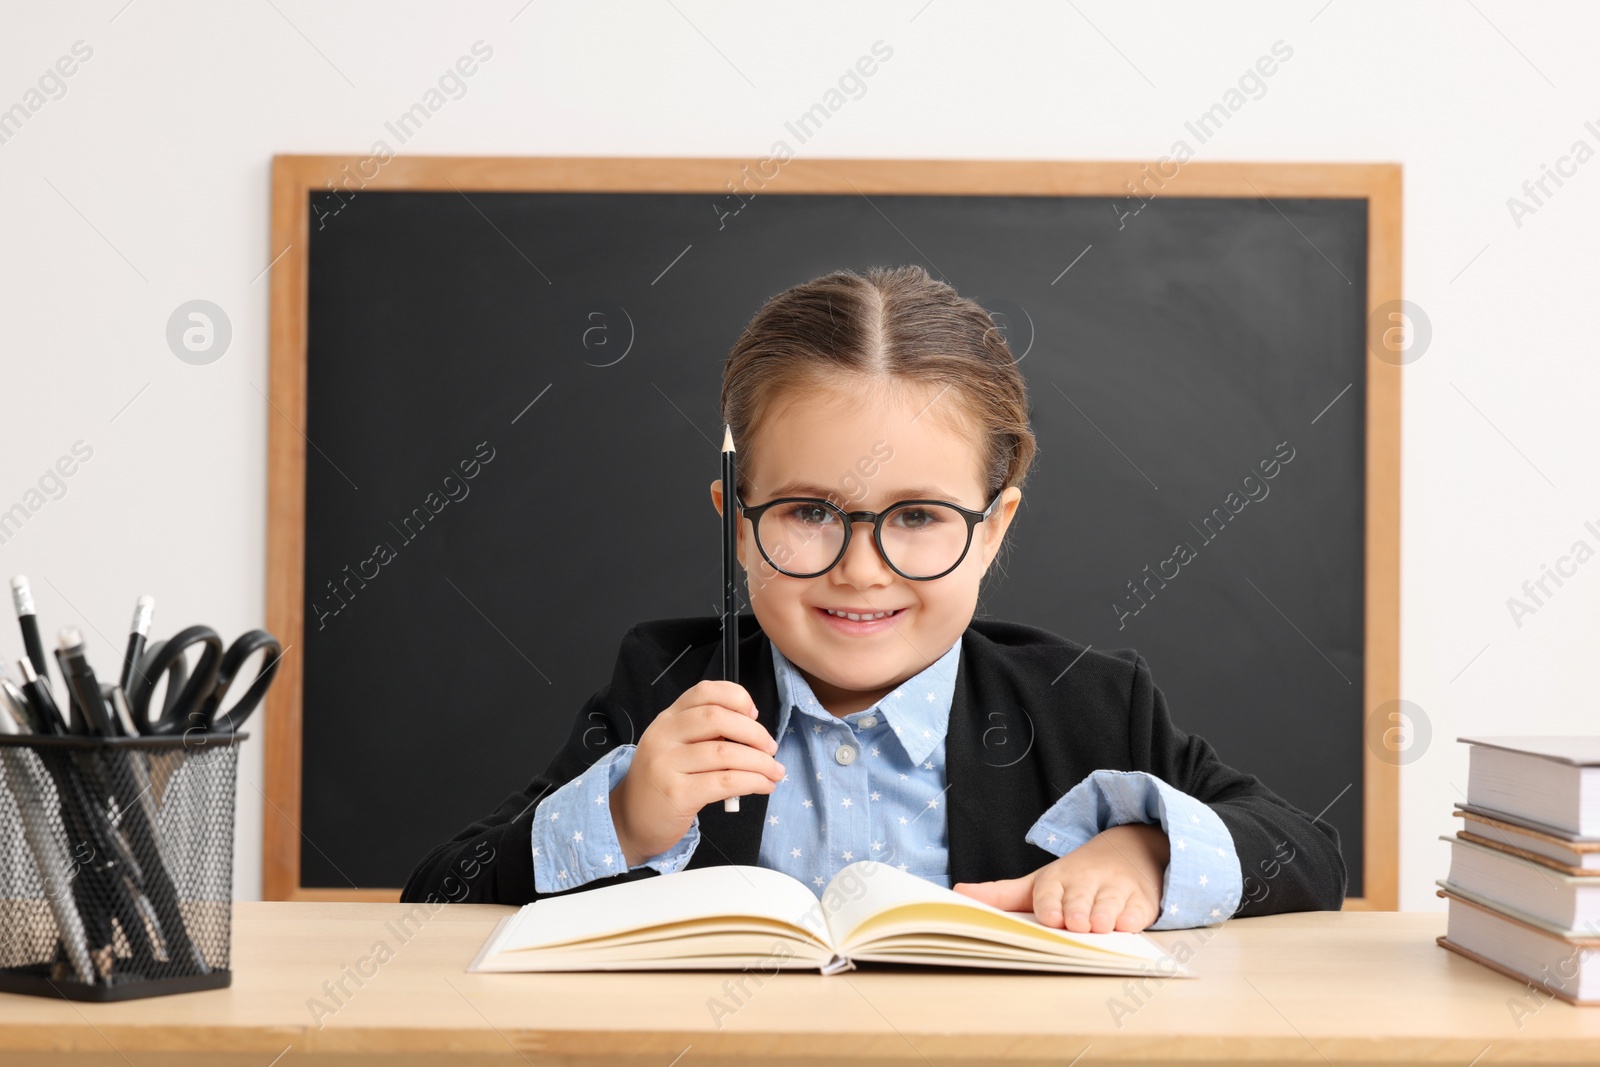 Photo of Happy little school child sitting at desk with books near chalkboard in classroom